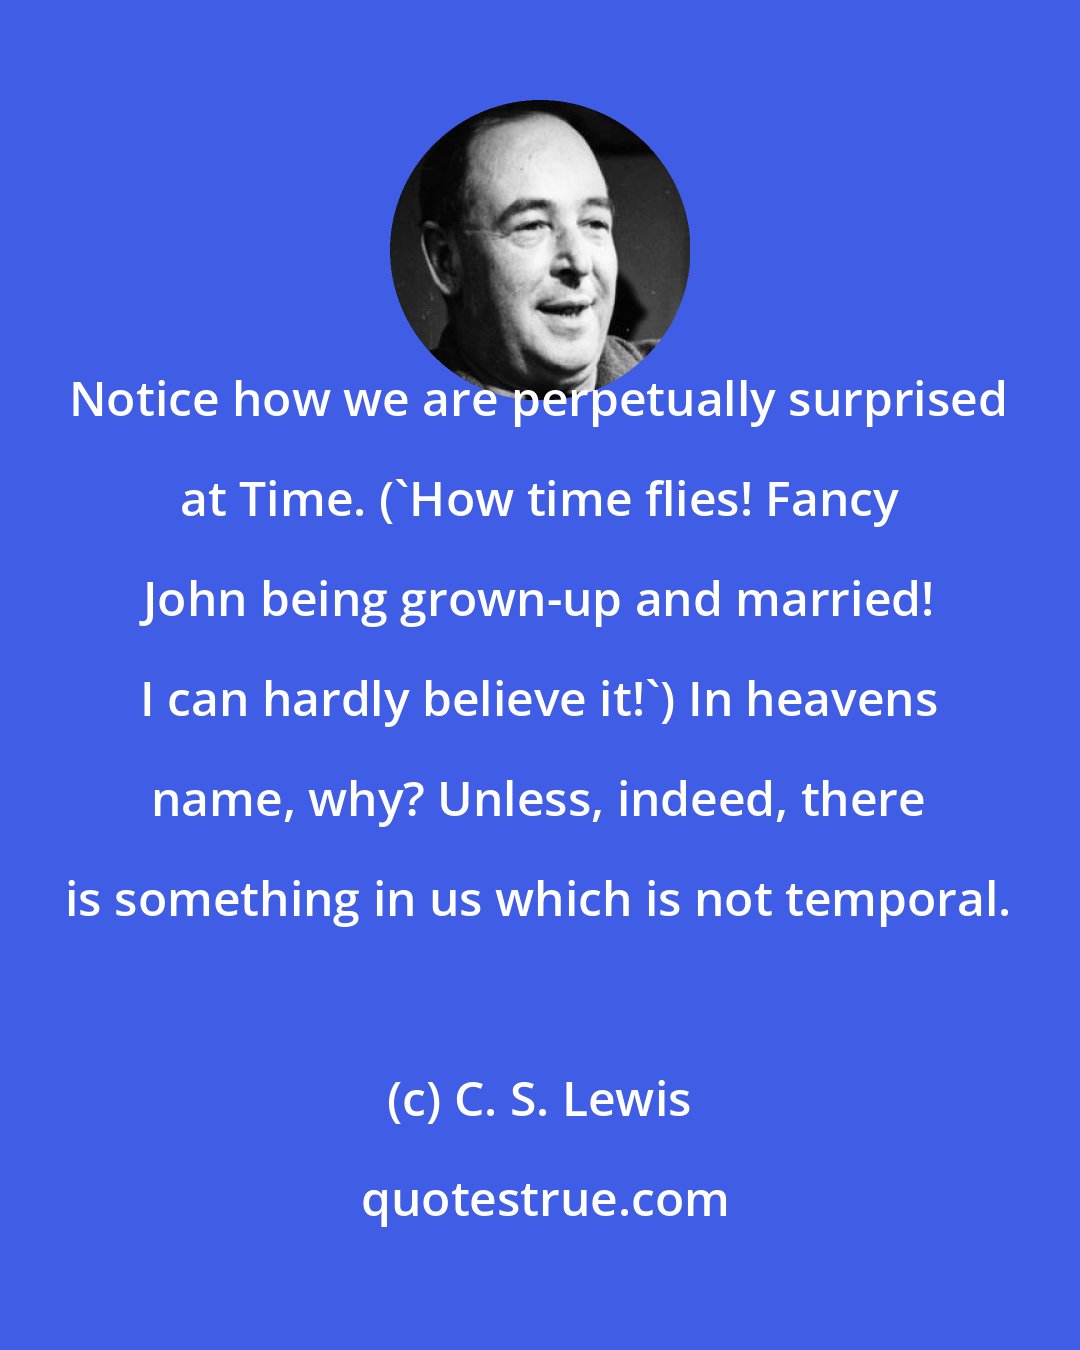 C. S. Lewis: Notice how we are perpetually surprised at Time. ('How time flies! Fancy John being grown-up and married! I can hardly believe it!') In heavens name, why? Unless, indeed, there is something in us which is not temporal.